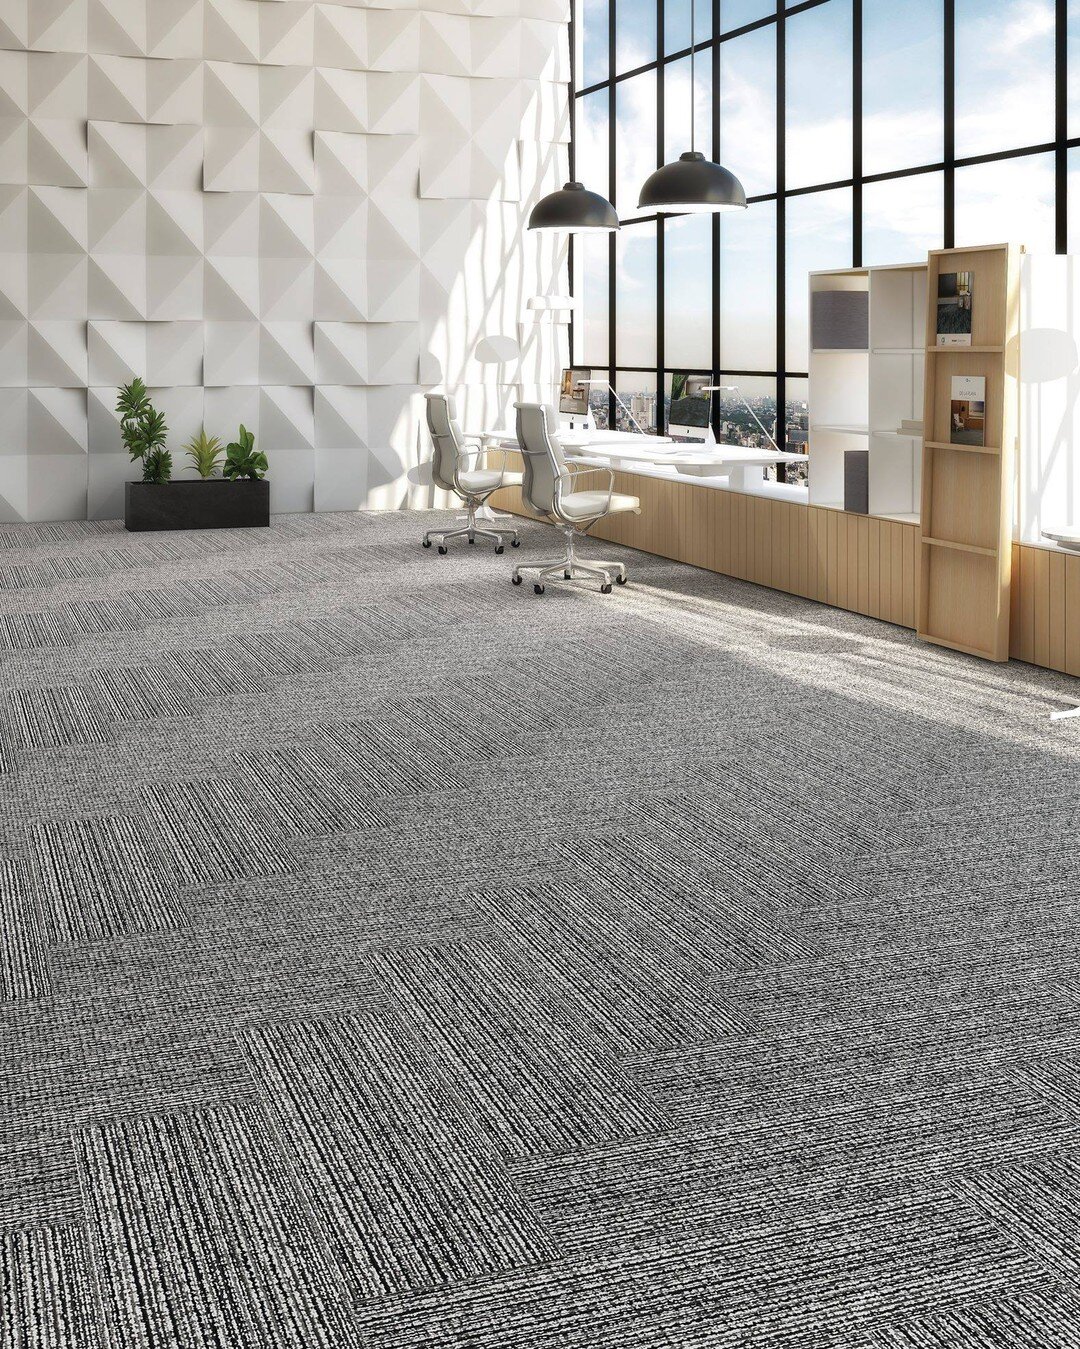 Beautiful carpet flooring imagined in a light and bright office space.